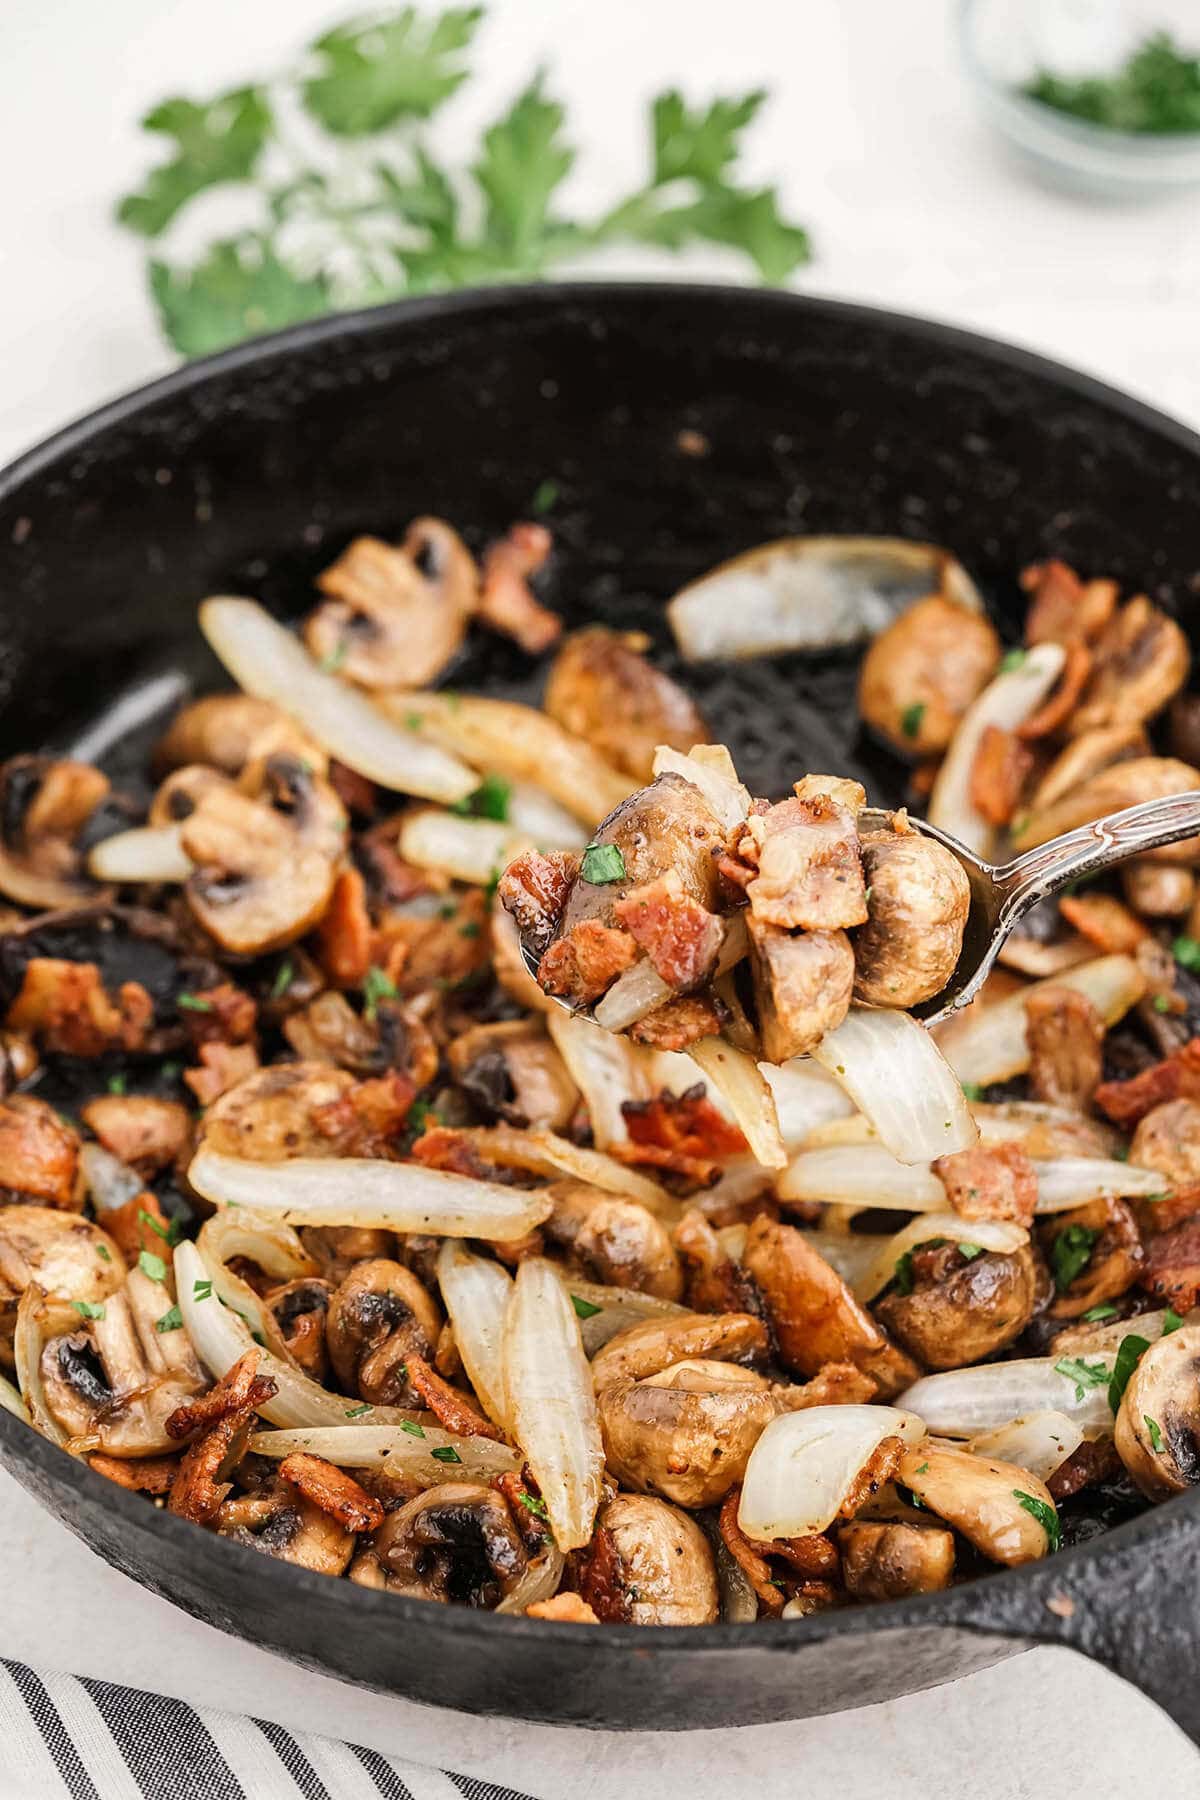 Cooked mushrooms and onions in cast iron skillet.